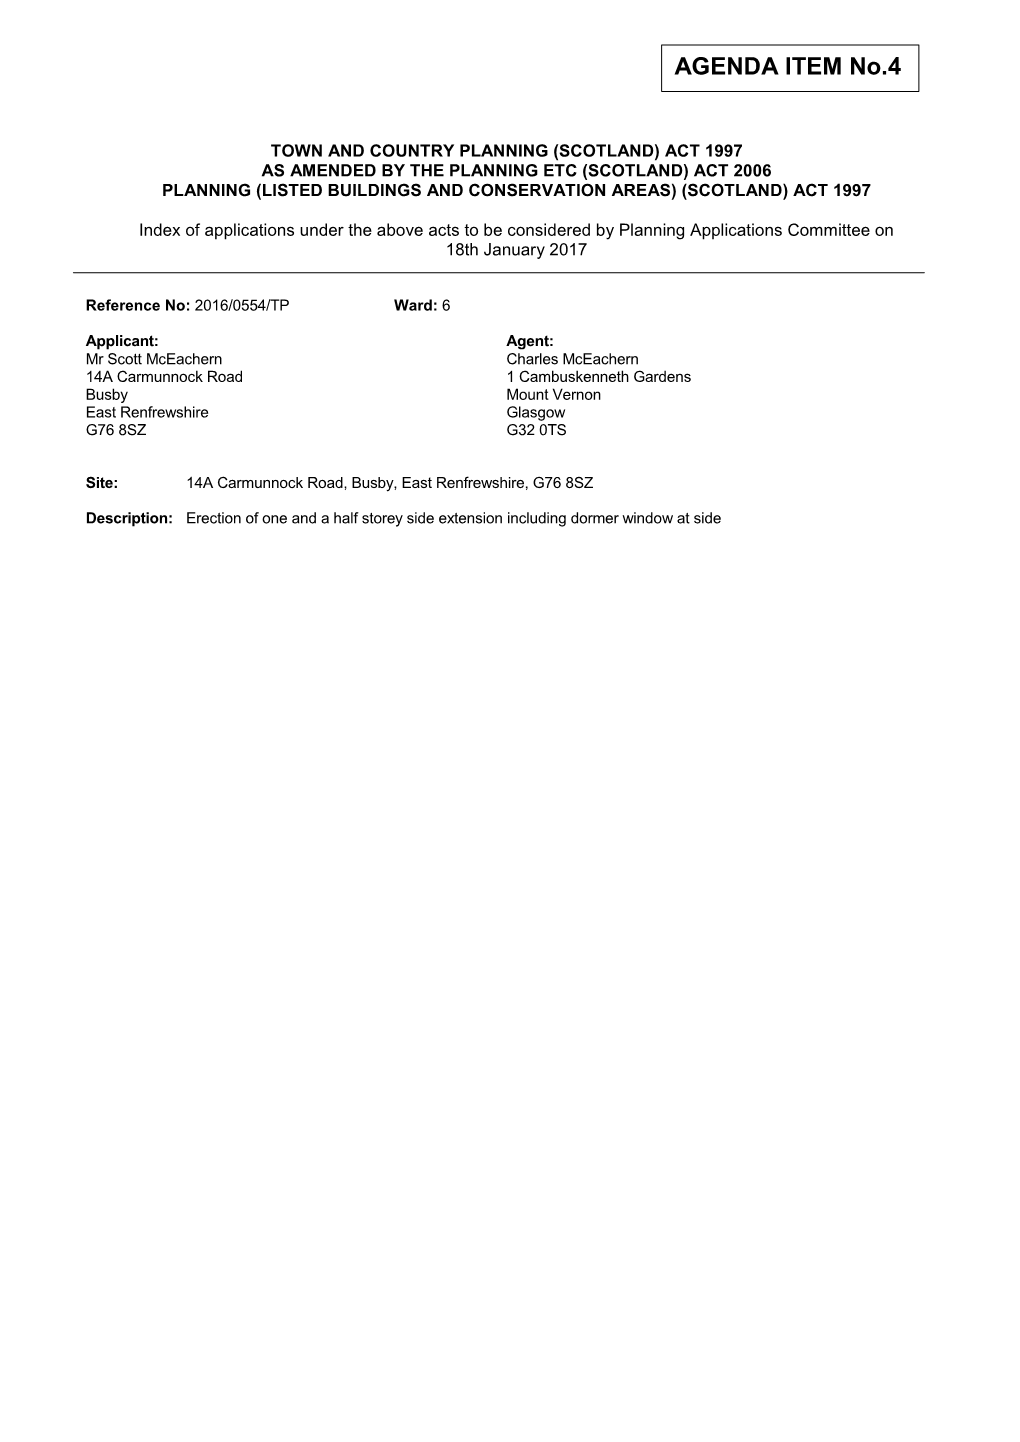 Planning Application Committee Item 04